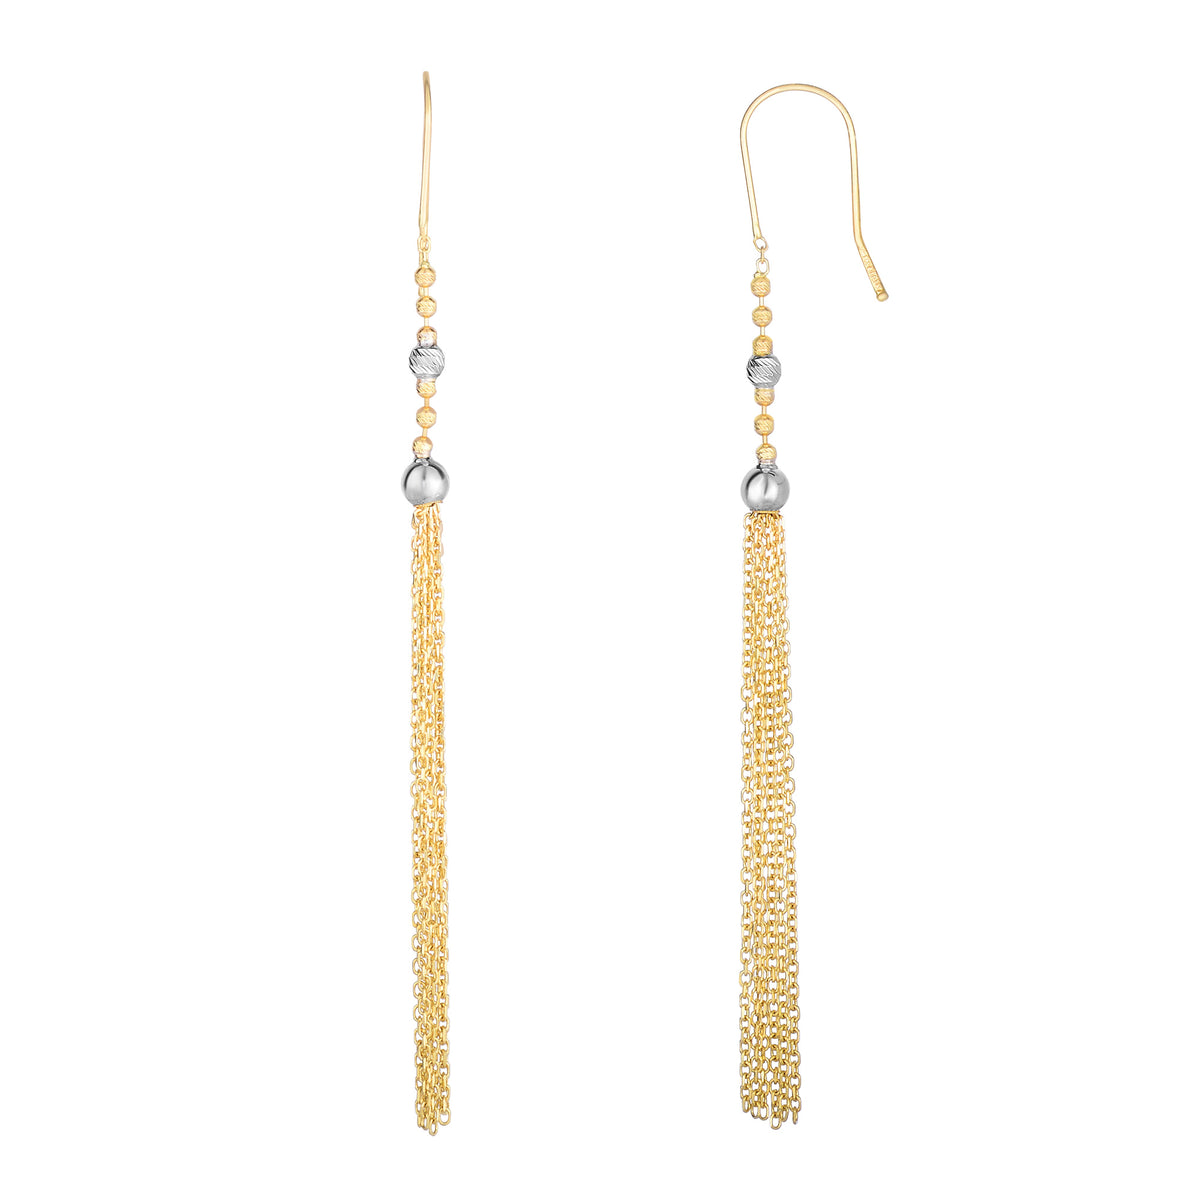 14K Two Tone Gold Diamond Cut Beads With Cable Chain Tassel Drop Earrings fine designer jewelry for men and women